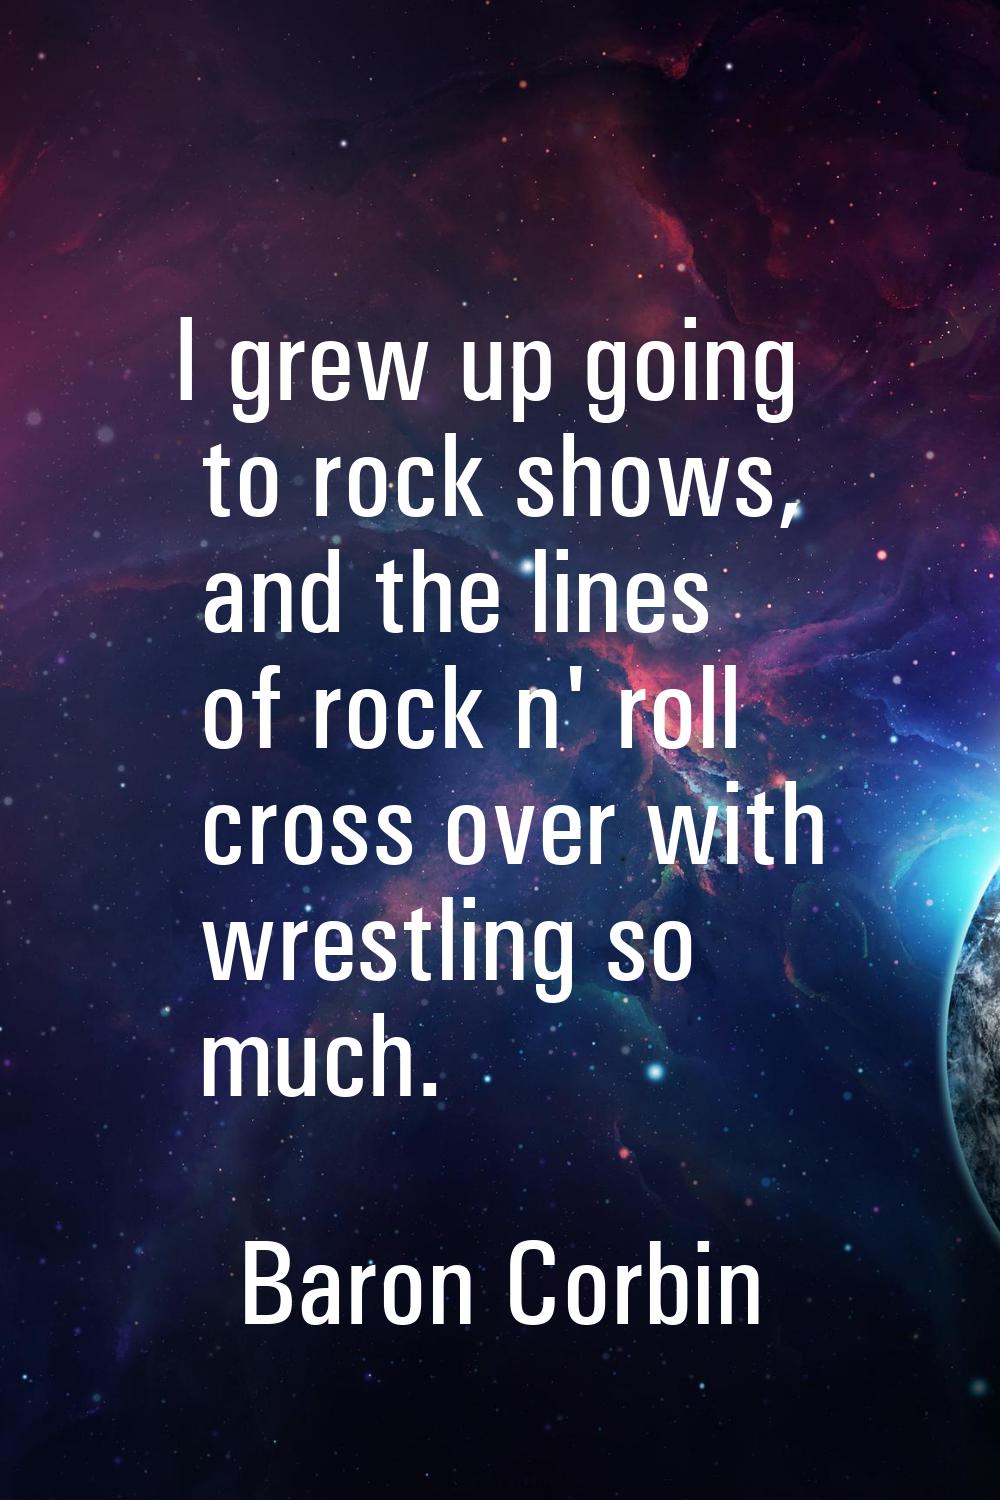 I grew up going to rock shows, and the lines of rock n' roll cross over with wrestling so much.